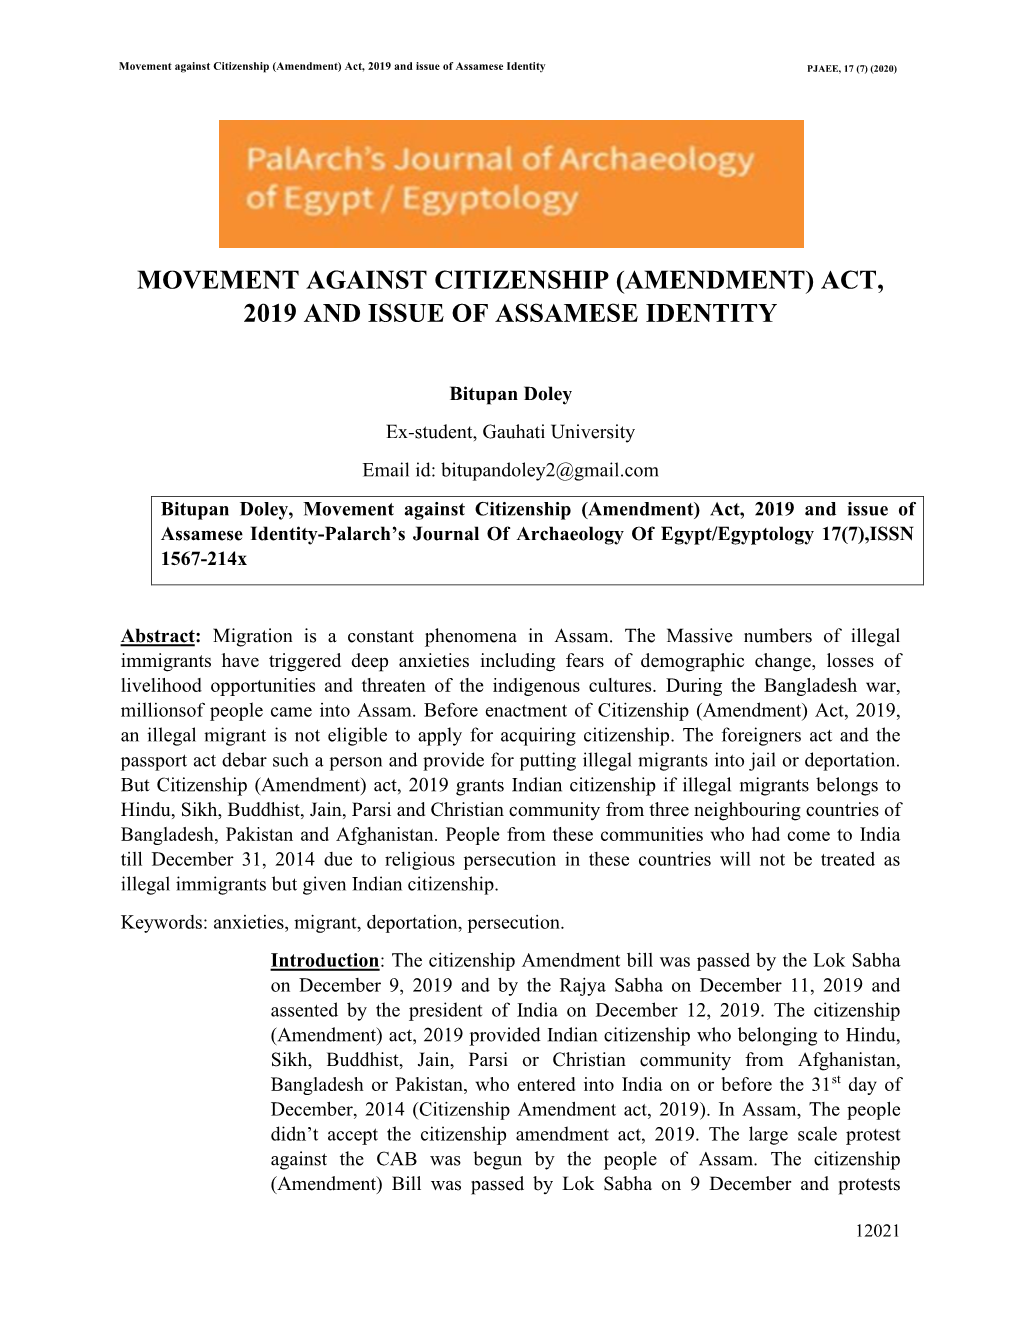 Movement Against Citizenship (Amendment) Act, 2019 and Issue of Assamese Identity PJAEE, 17 (7) (2020)